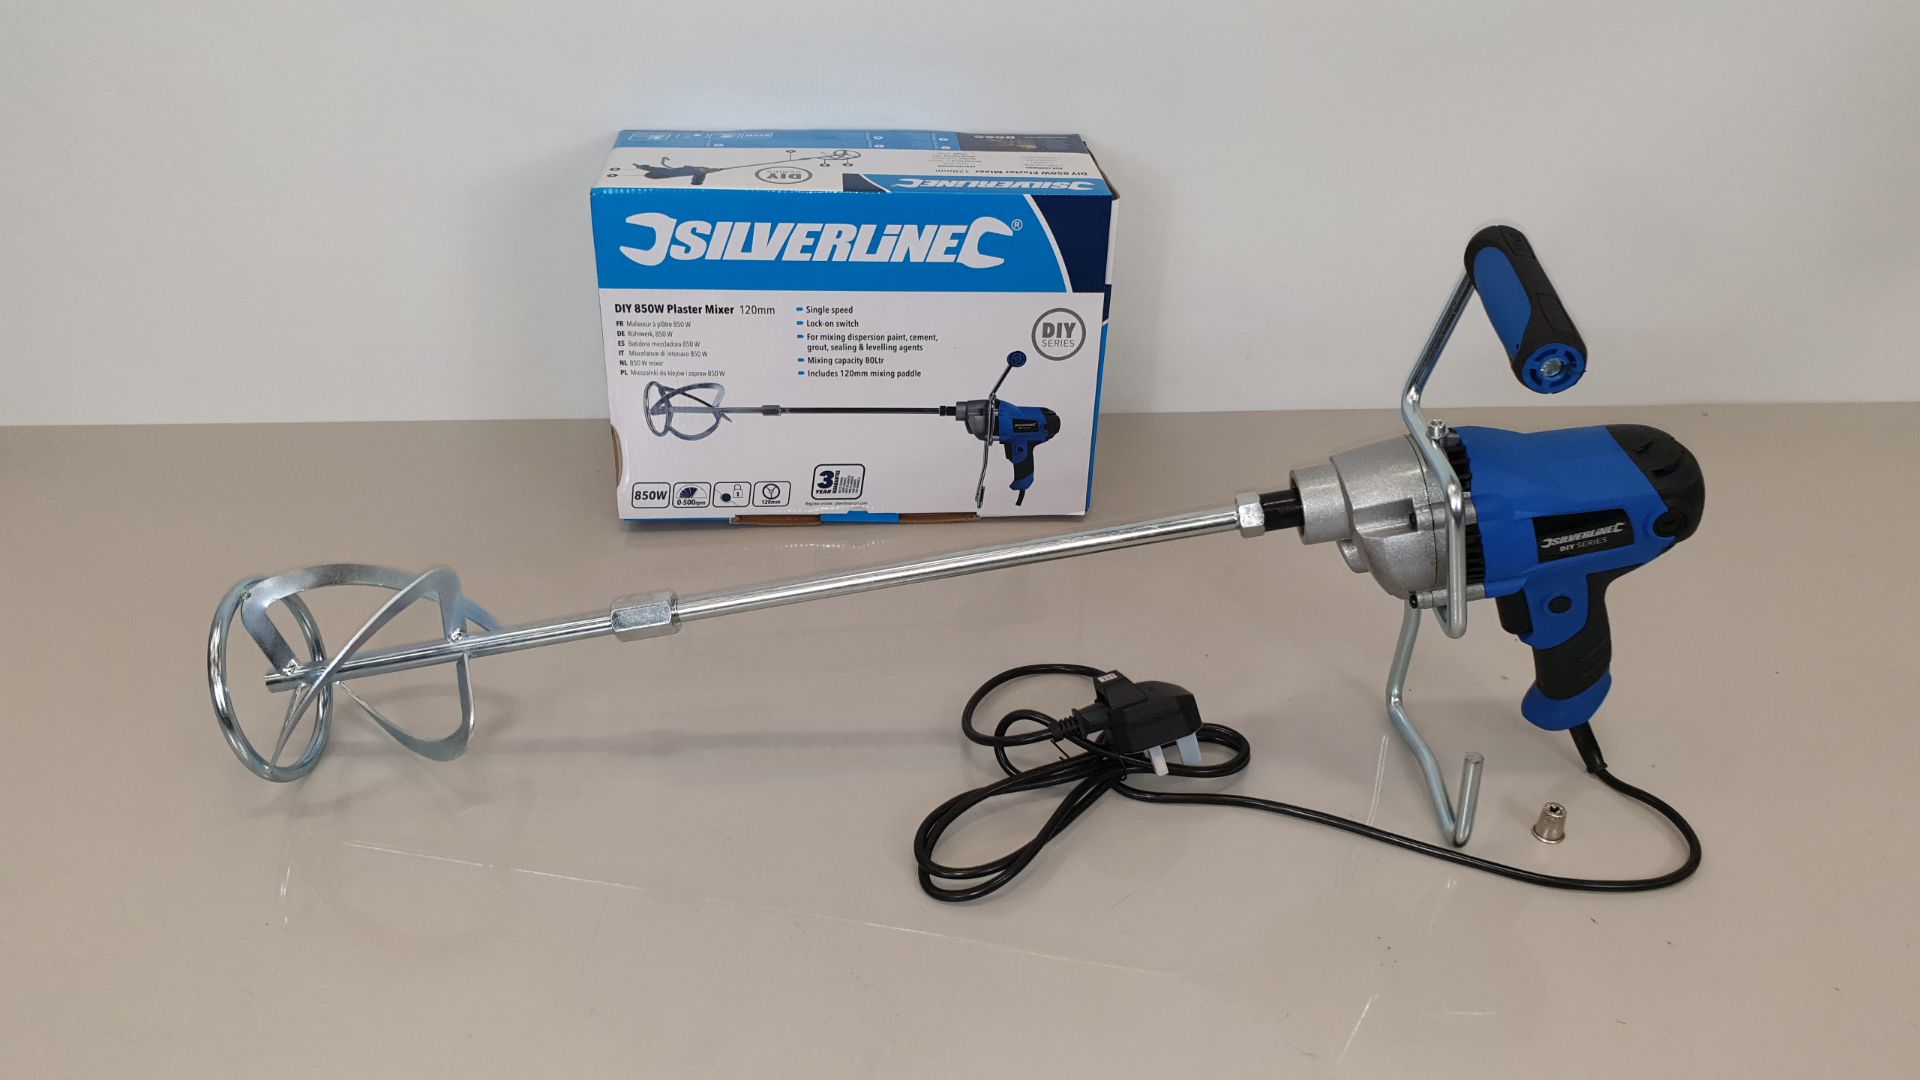 2 X BRAND NEW SILVERLINE DIY 850W PAINT / CEMENT / PLASTER MIXERS WITH 120MM DIA PADDLE, 80 LITRE